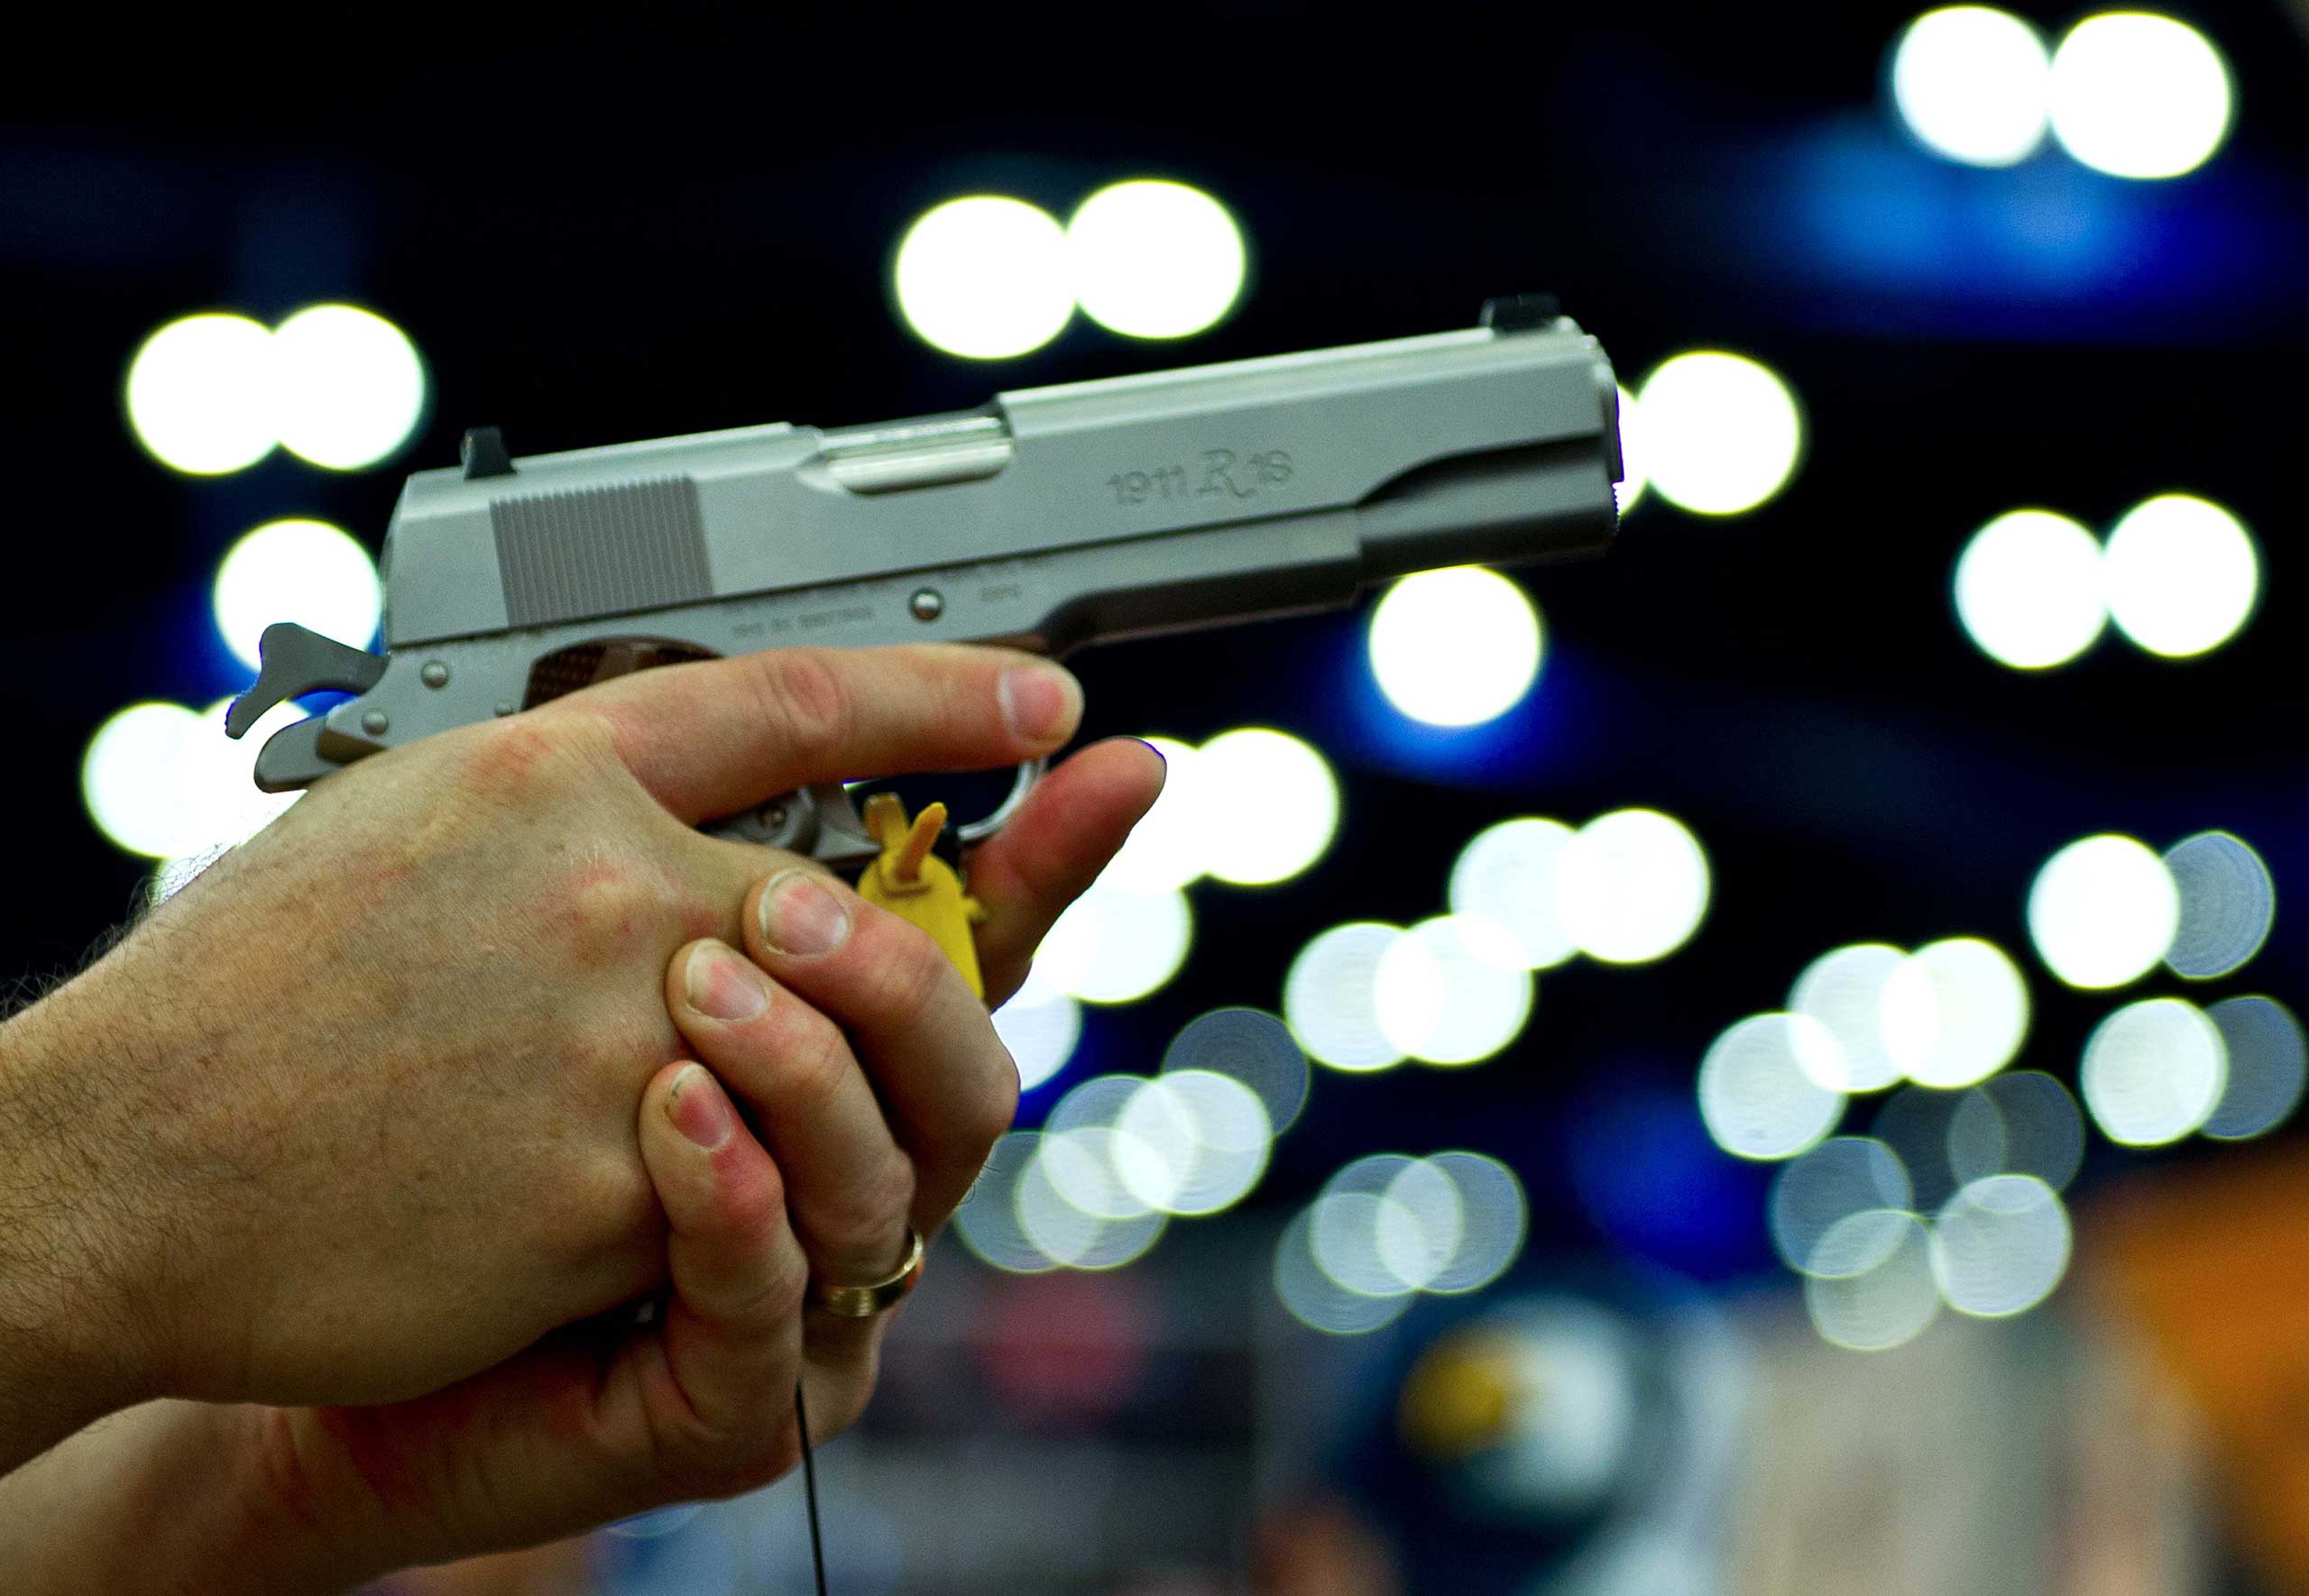 A convention goer handles a Ruger 1911 model semi-automatic pistol during the142nd annual National Rifle Association convention at the George R. Brown Convention Center on May 4, 2013 in Houston. (Karen Bleier—AFP/Getty Images)